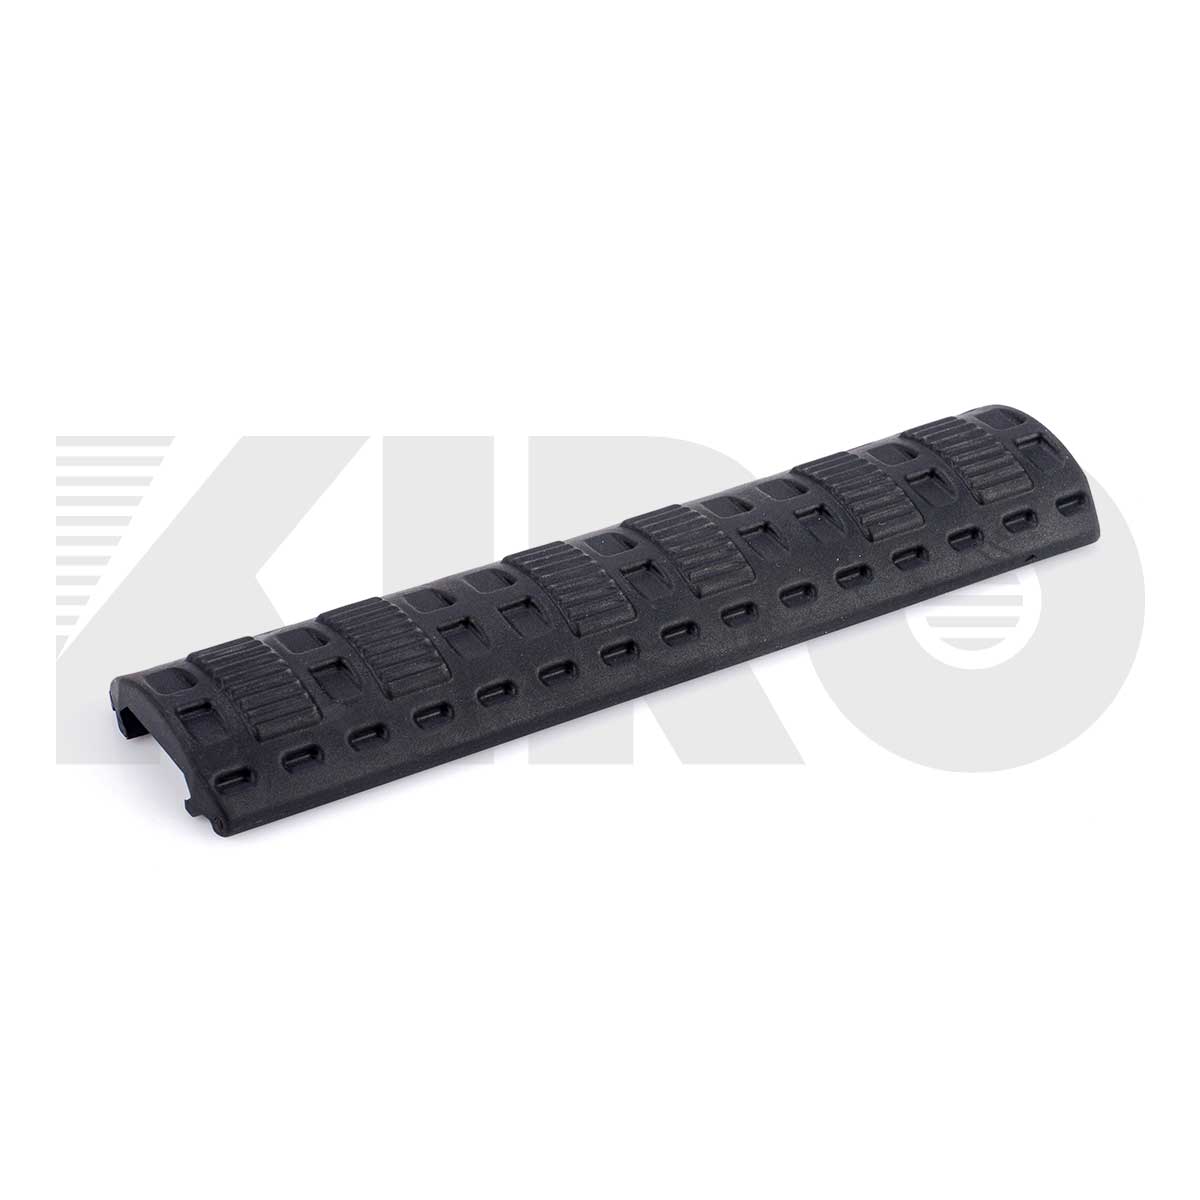 KIRO HRC - Hardened and Rubberized Cover 5/15cm